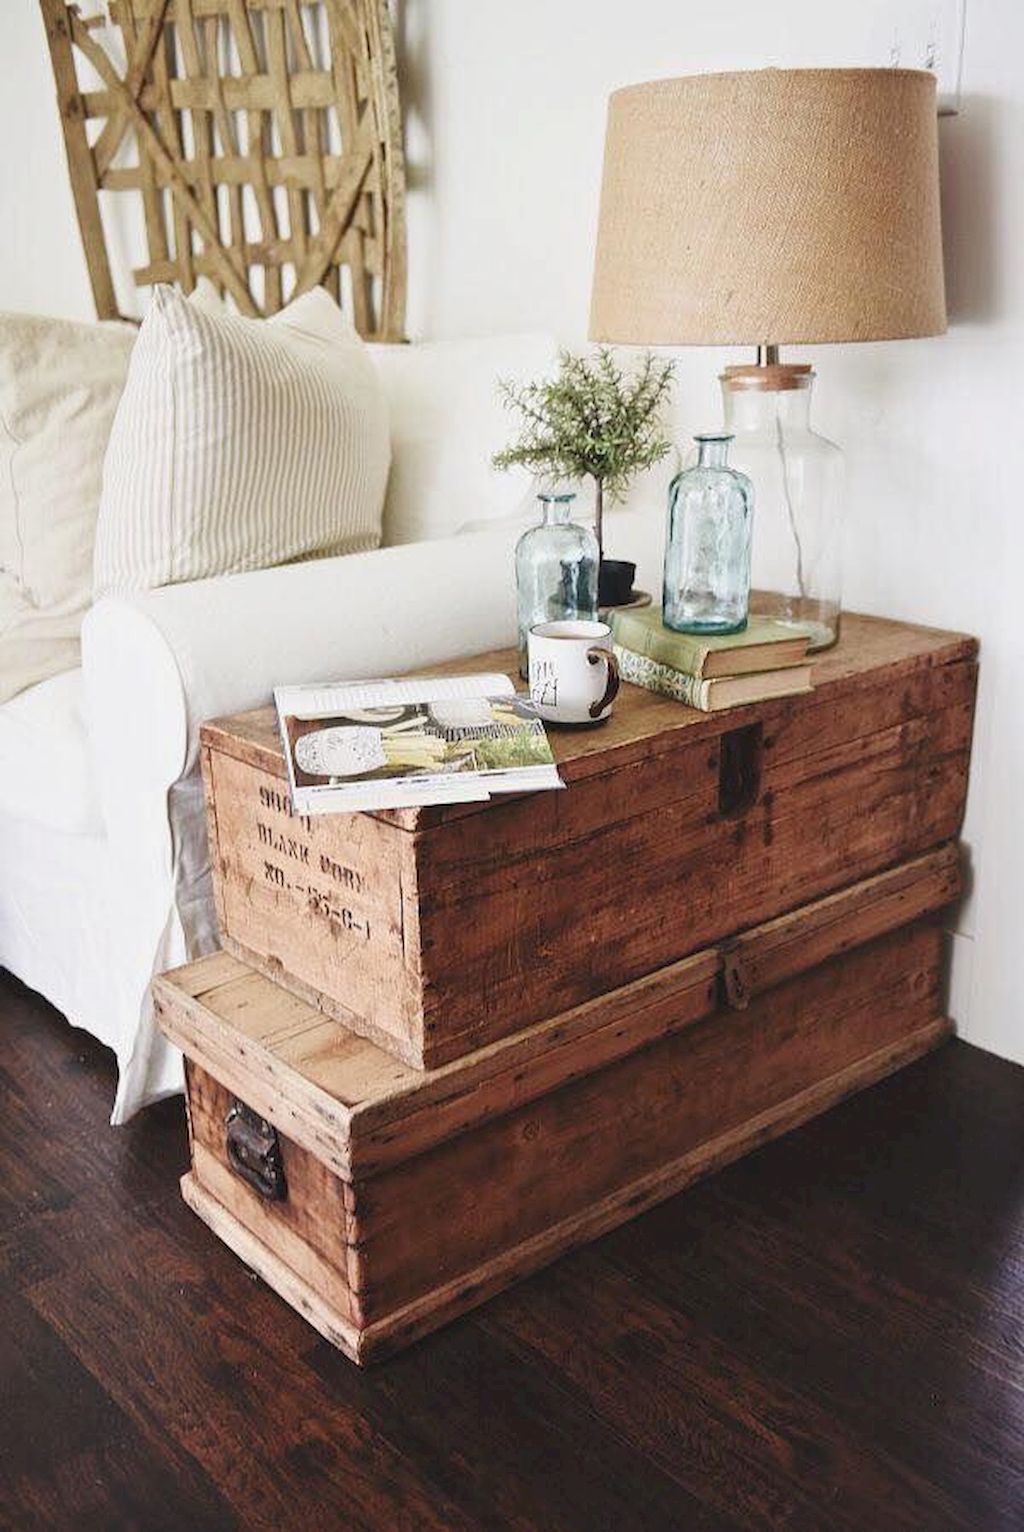 Creative Farmhouse Style Side Table Design Made From Scrap And Reclaimed Materials (22)